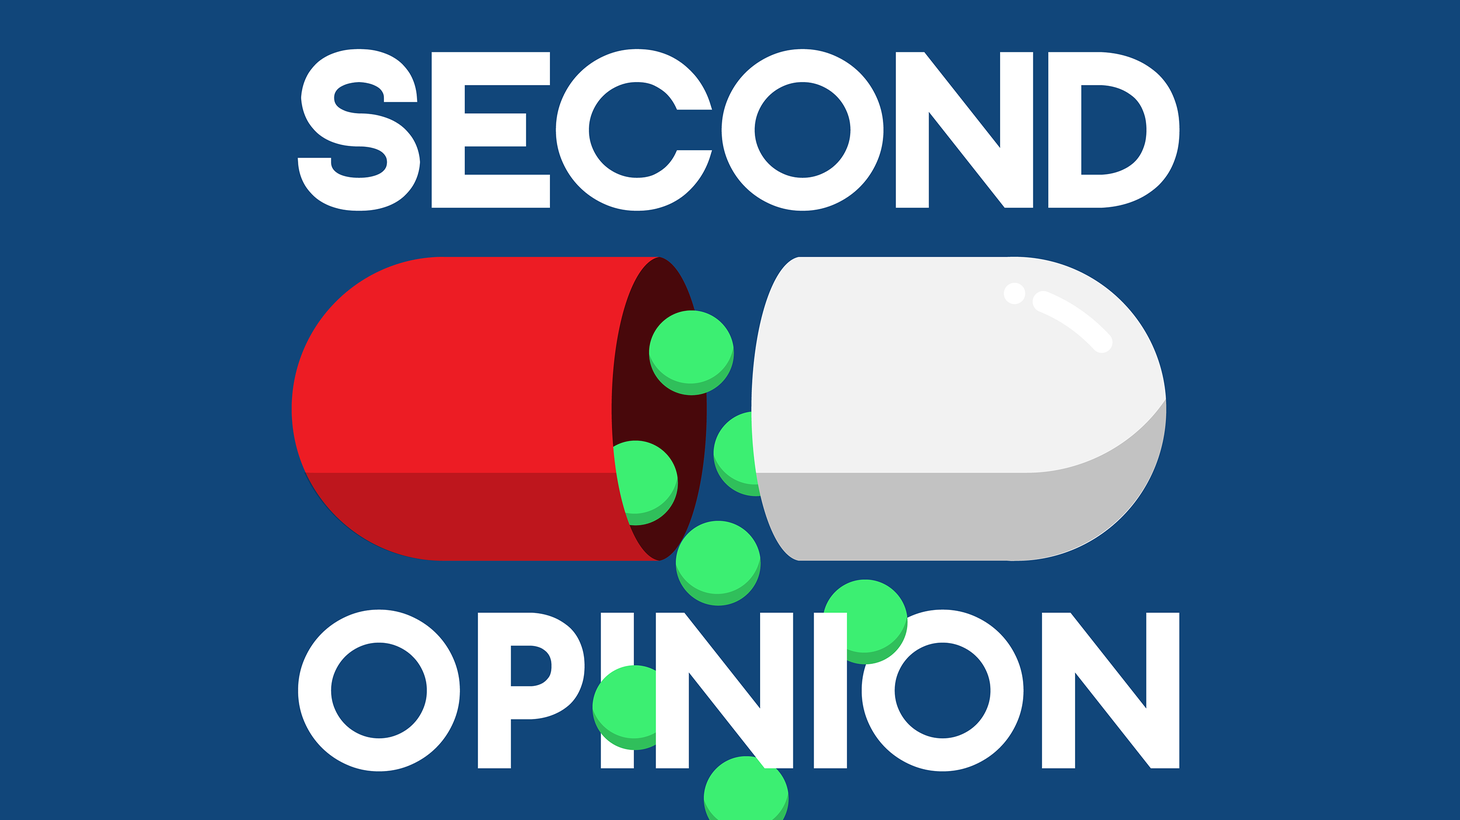 Recommendations to approve two drugs that are not ready for prime time.